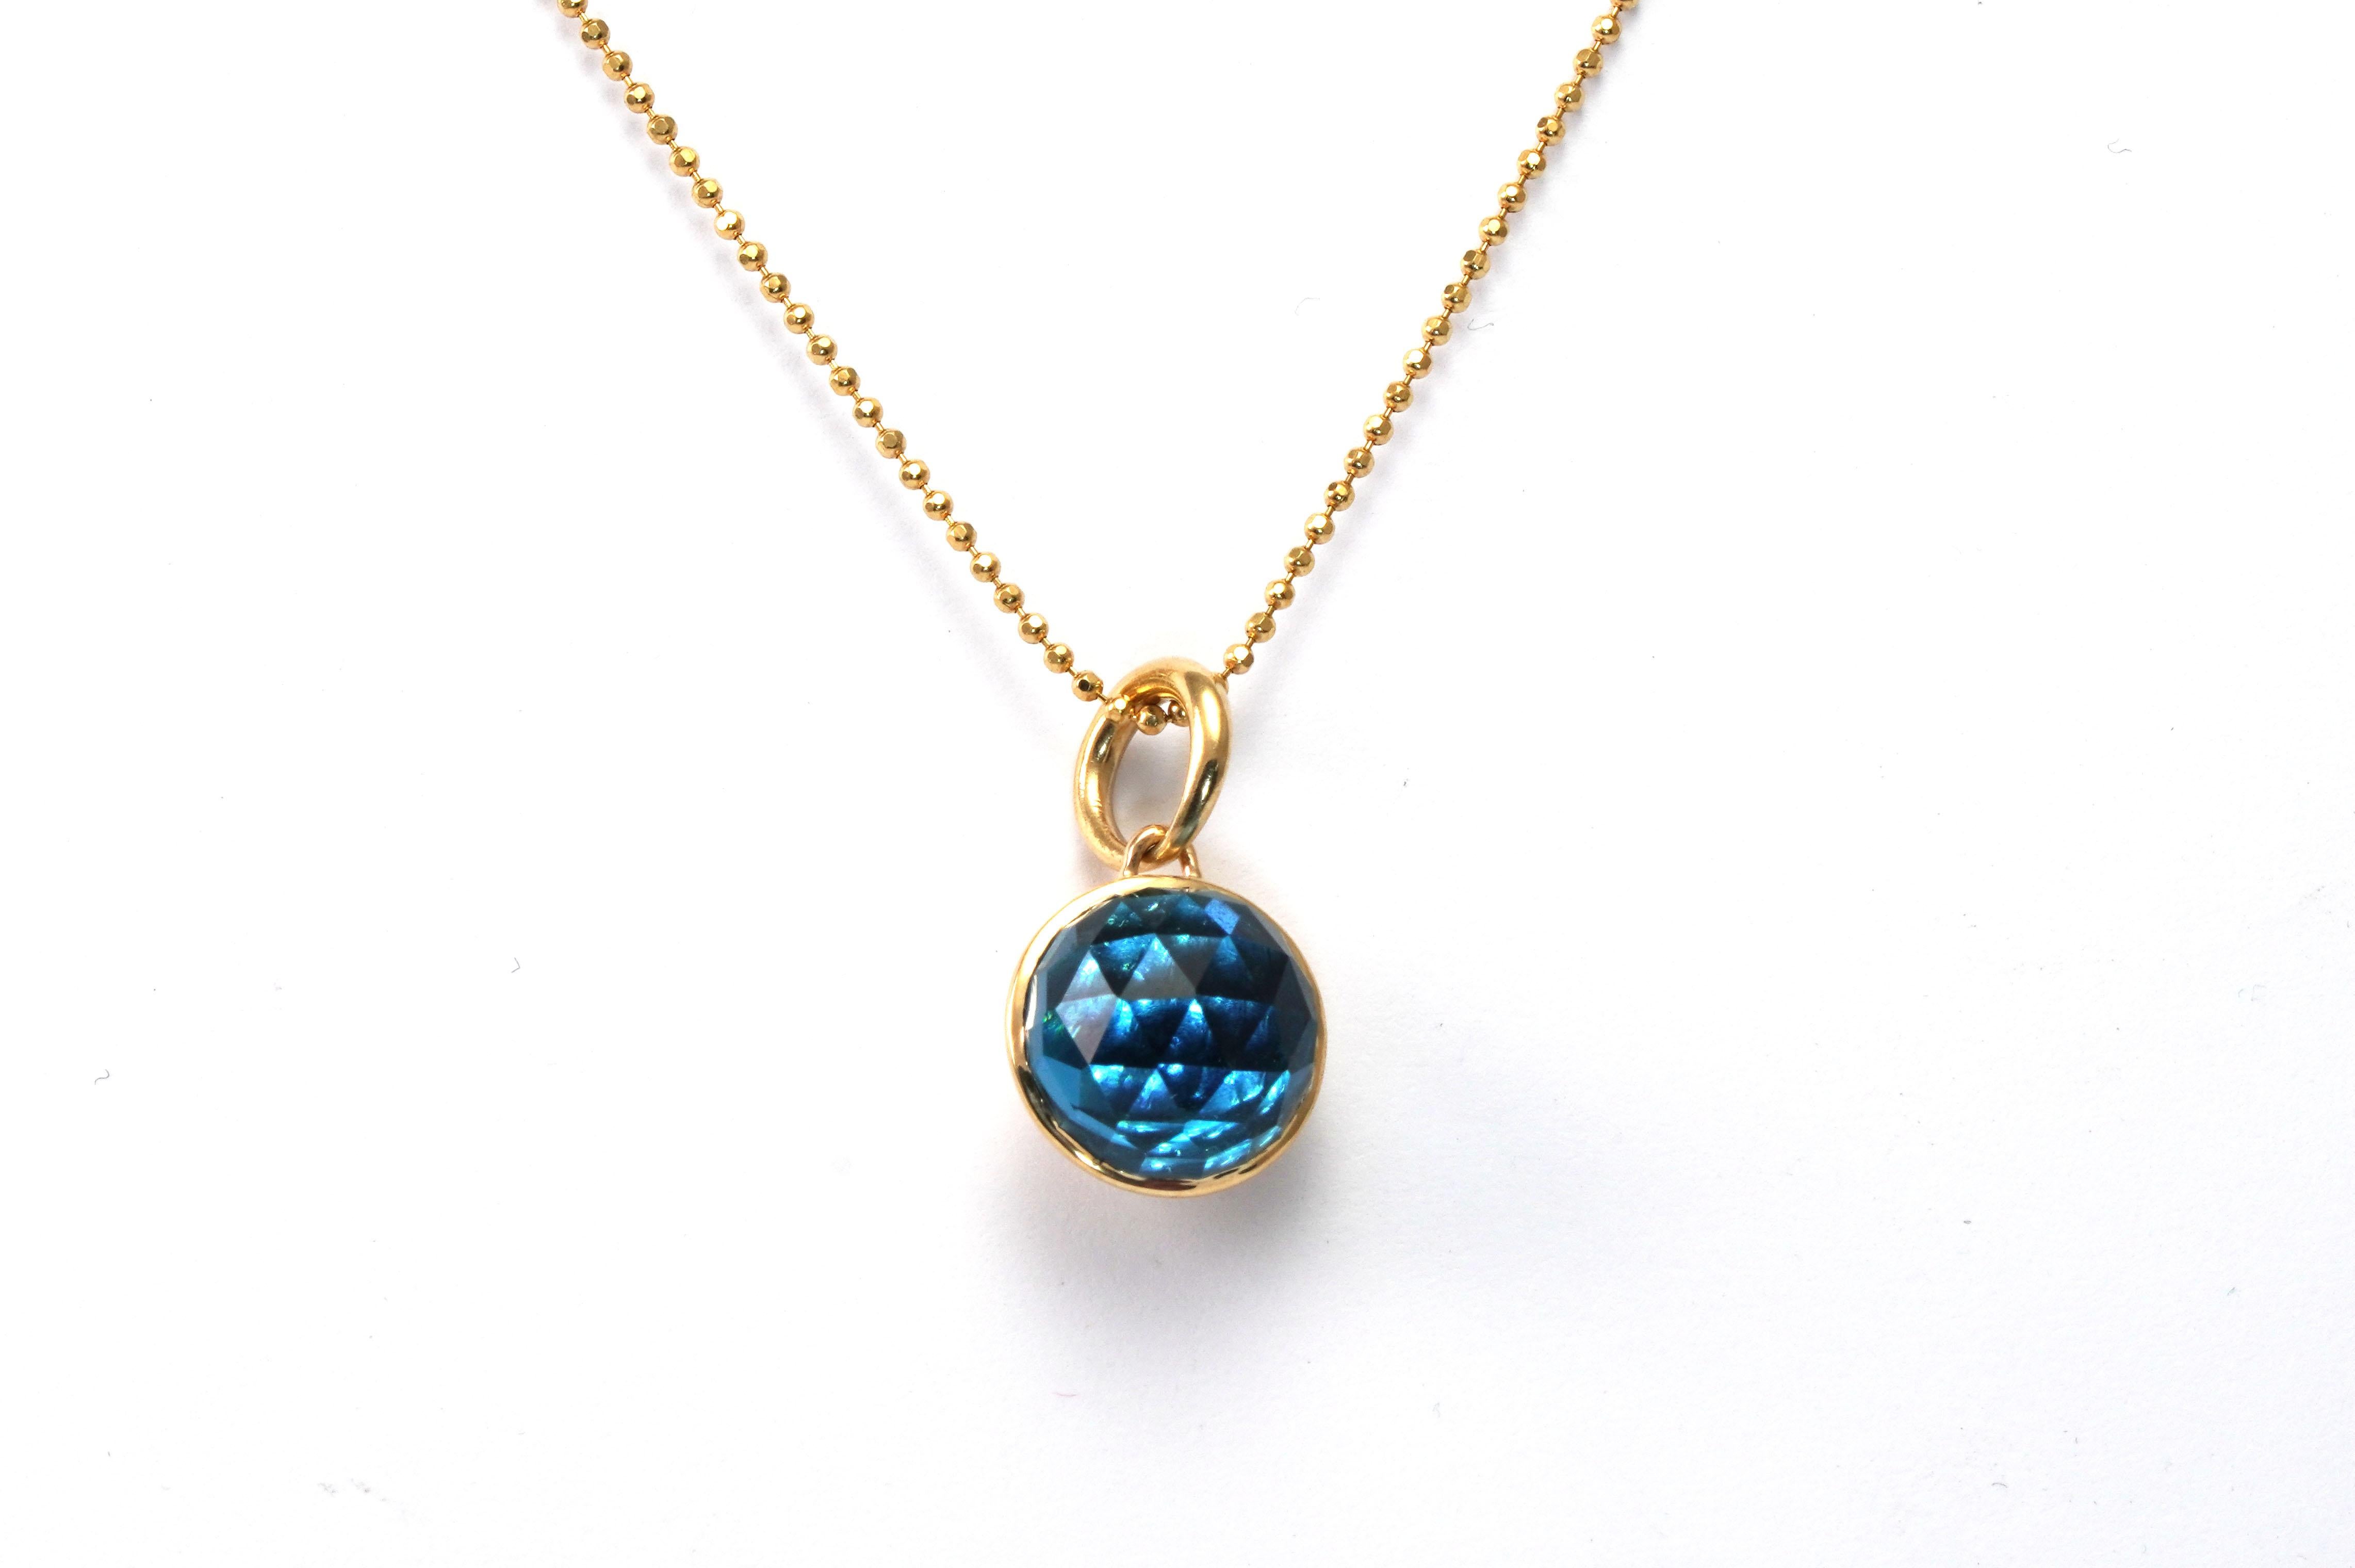 14 kt Gold Necklace with Blue Topaz
Gold color: Yellow
Dimensions:  44 cm Width
Total weight: 3.40 grams

Set with:
- Topaz
Cut: Rose
total weight: 4.27 ct
Colour: Swiss Blue